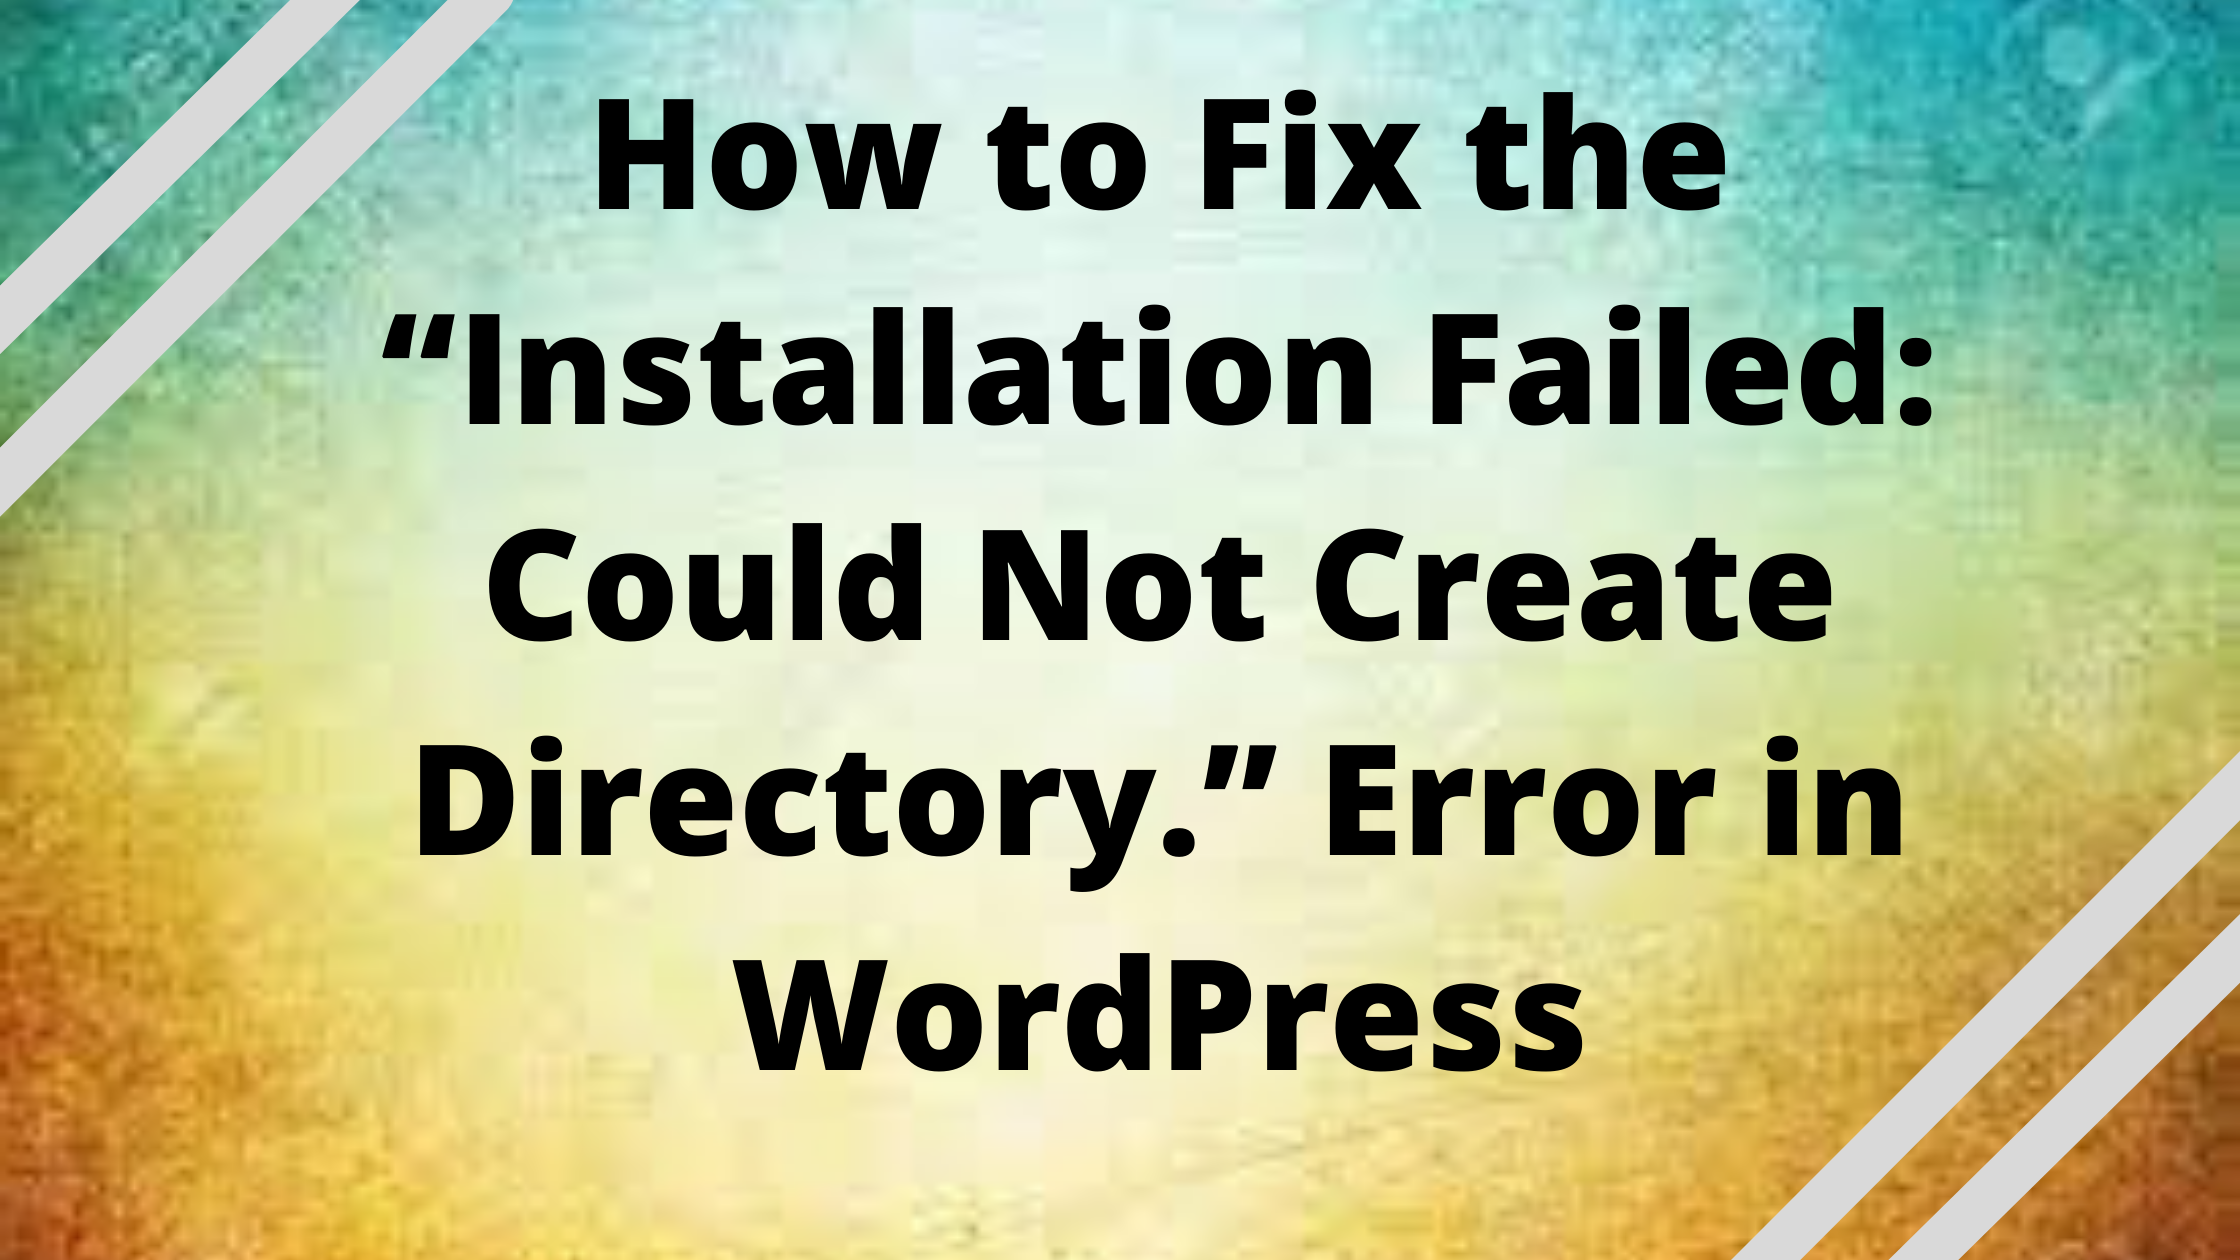 Installation Failed: Could Not Create Directory